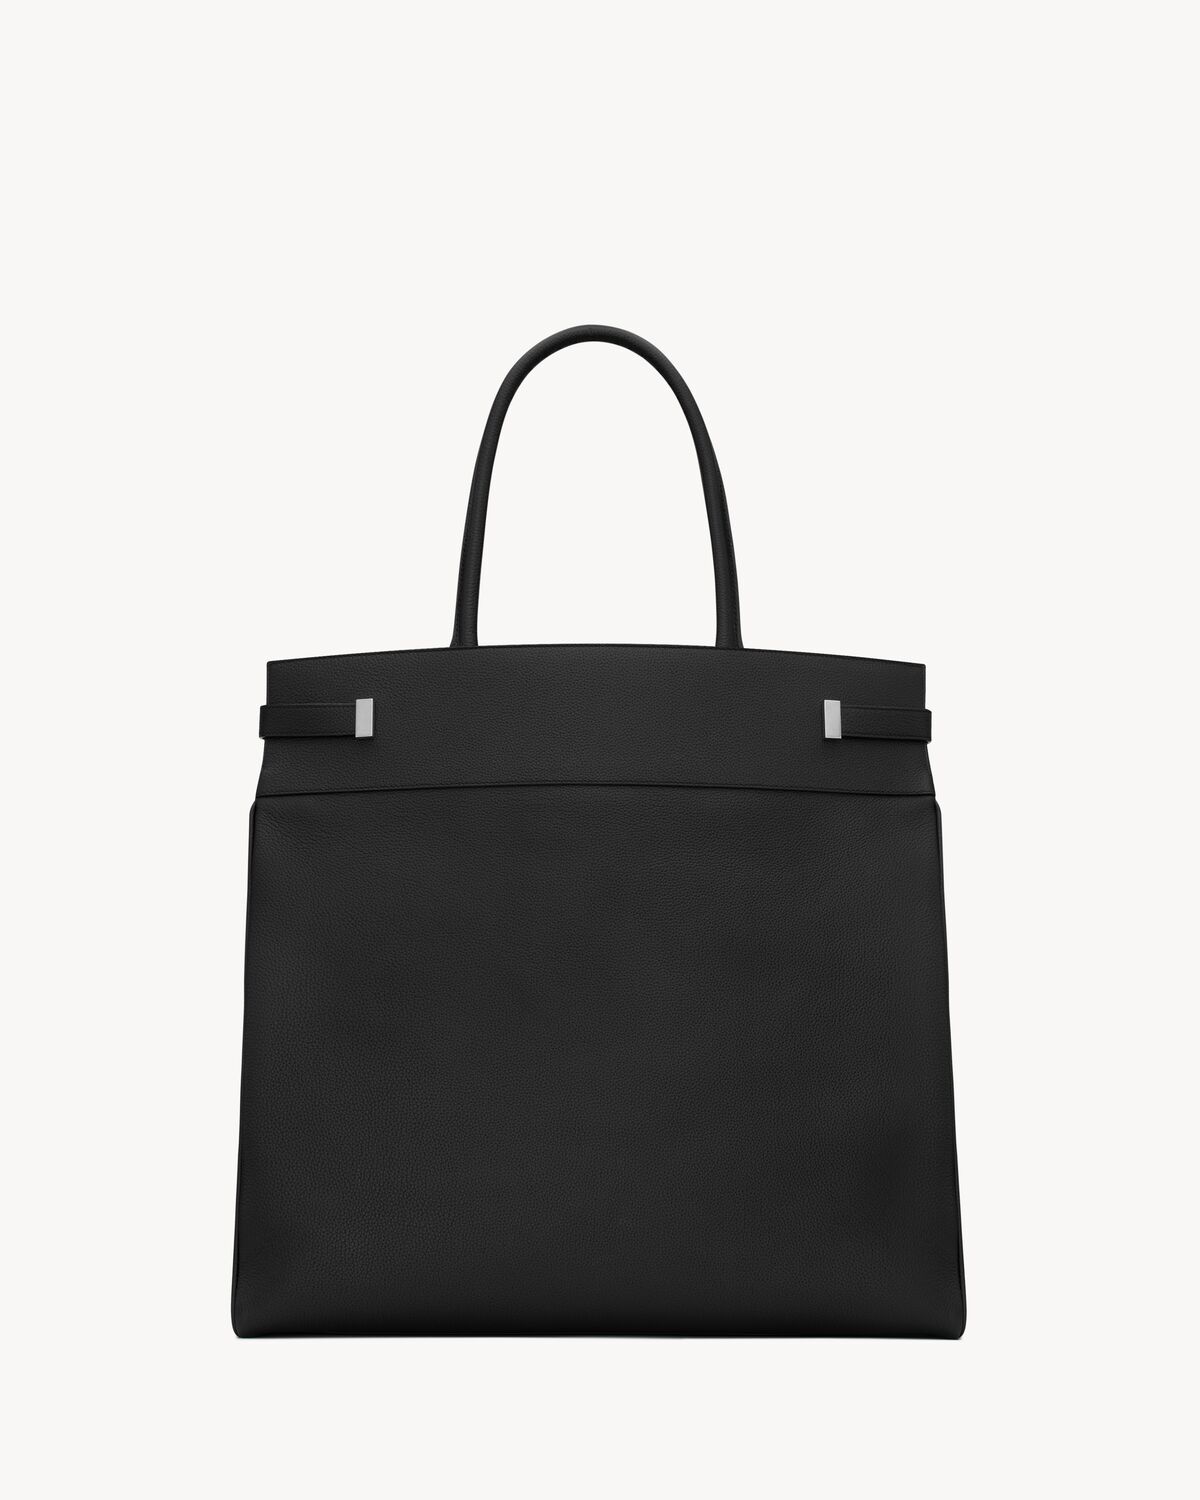 MANHATTAN N/S tote in grained leather